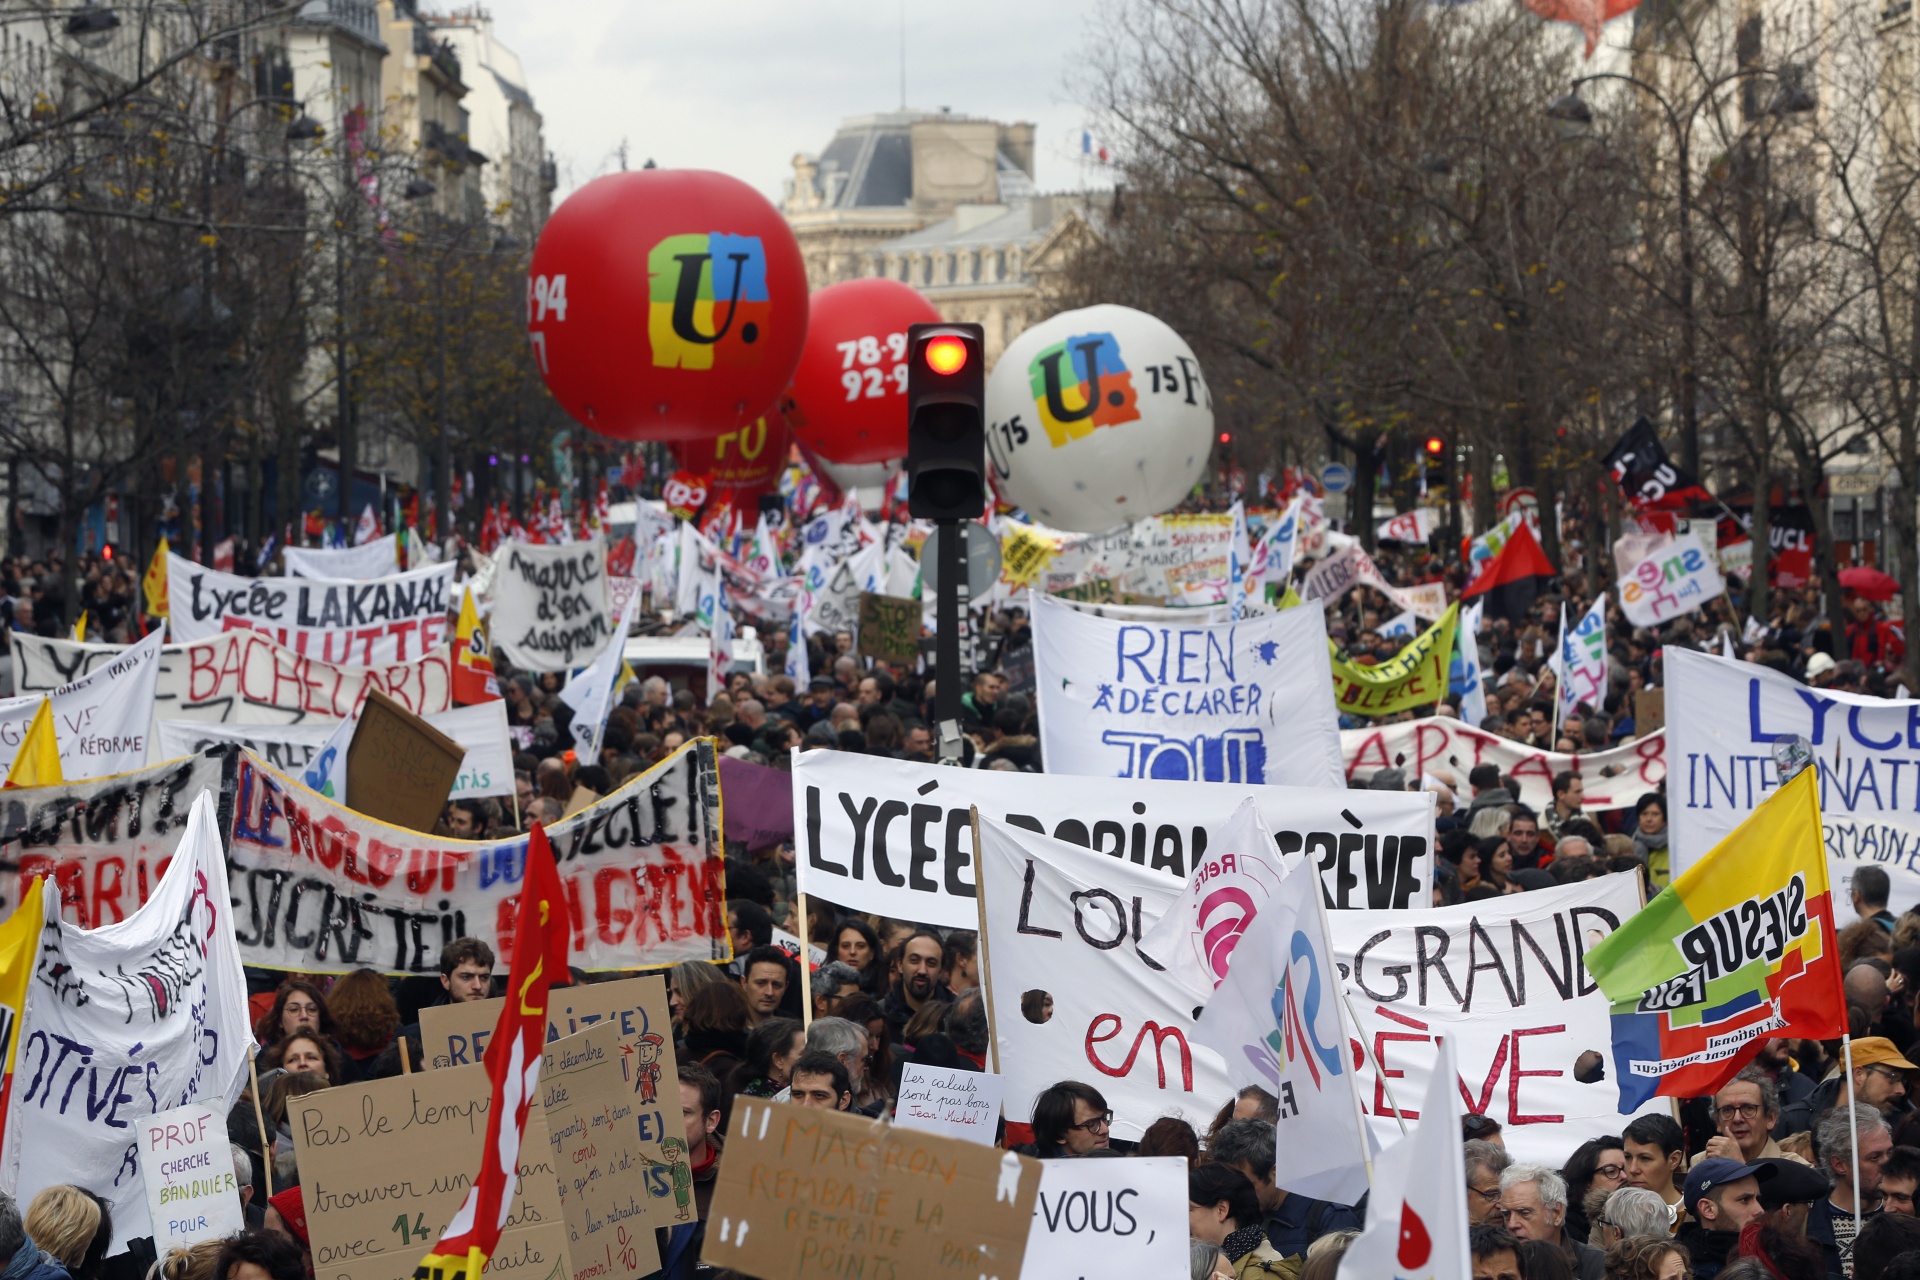 Demonstrators march with banners and union flags during a protest against pension reform plans in Paris